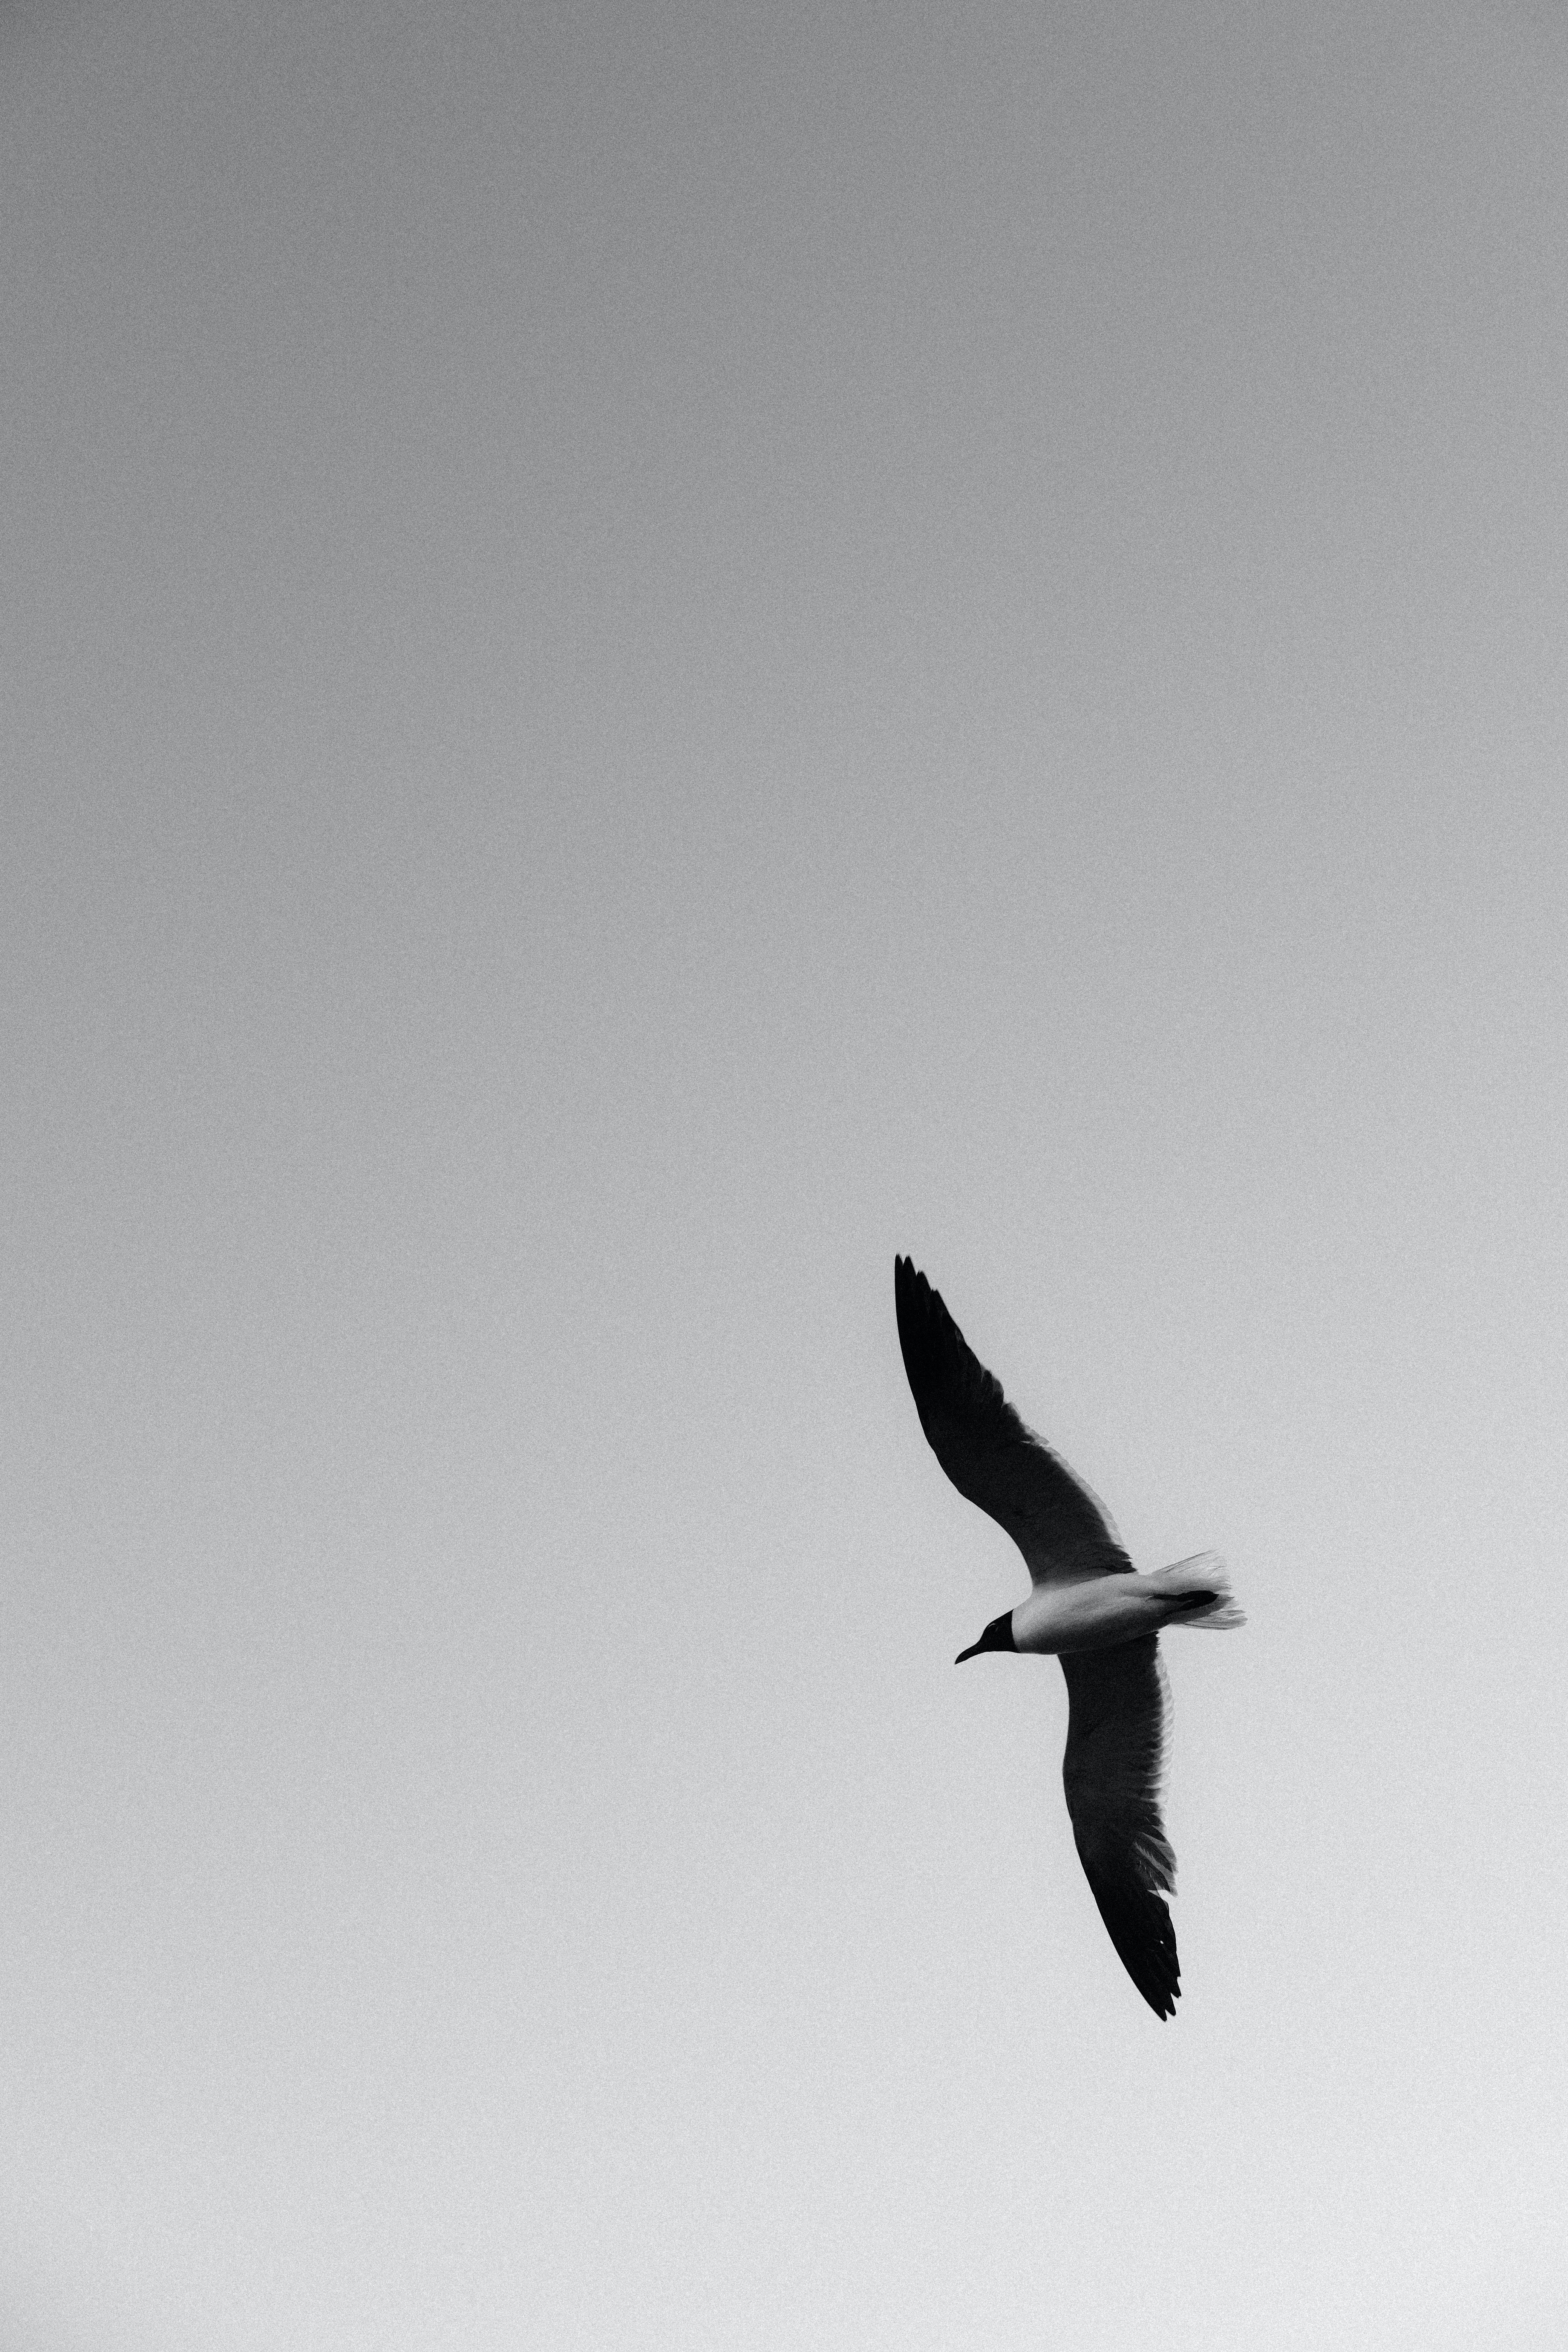 bw, gull, animals, bird, flight, chb, seagull, wings for android